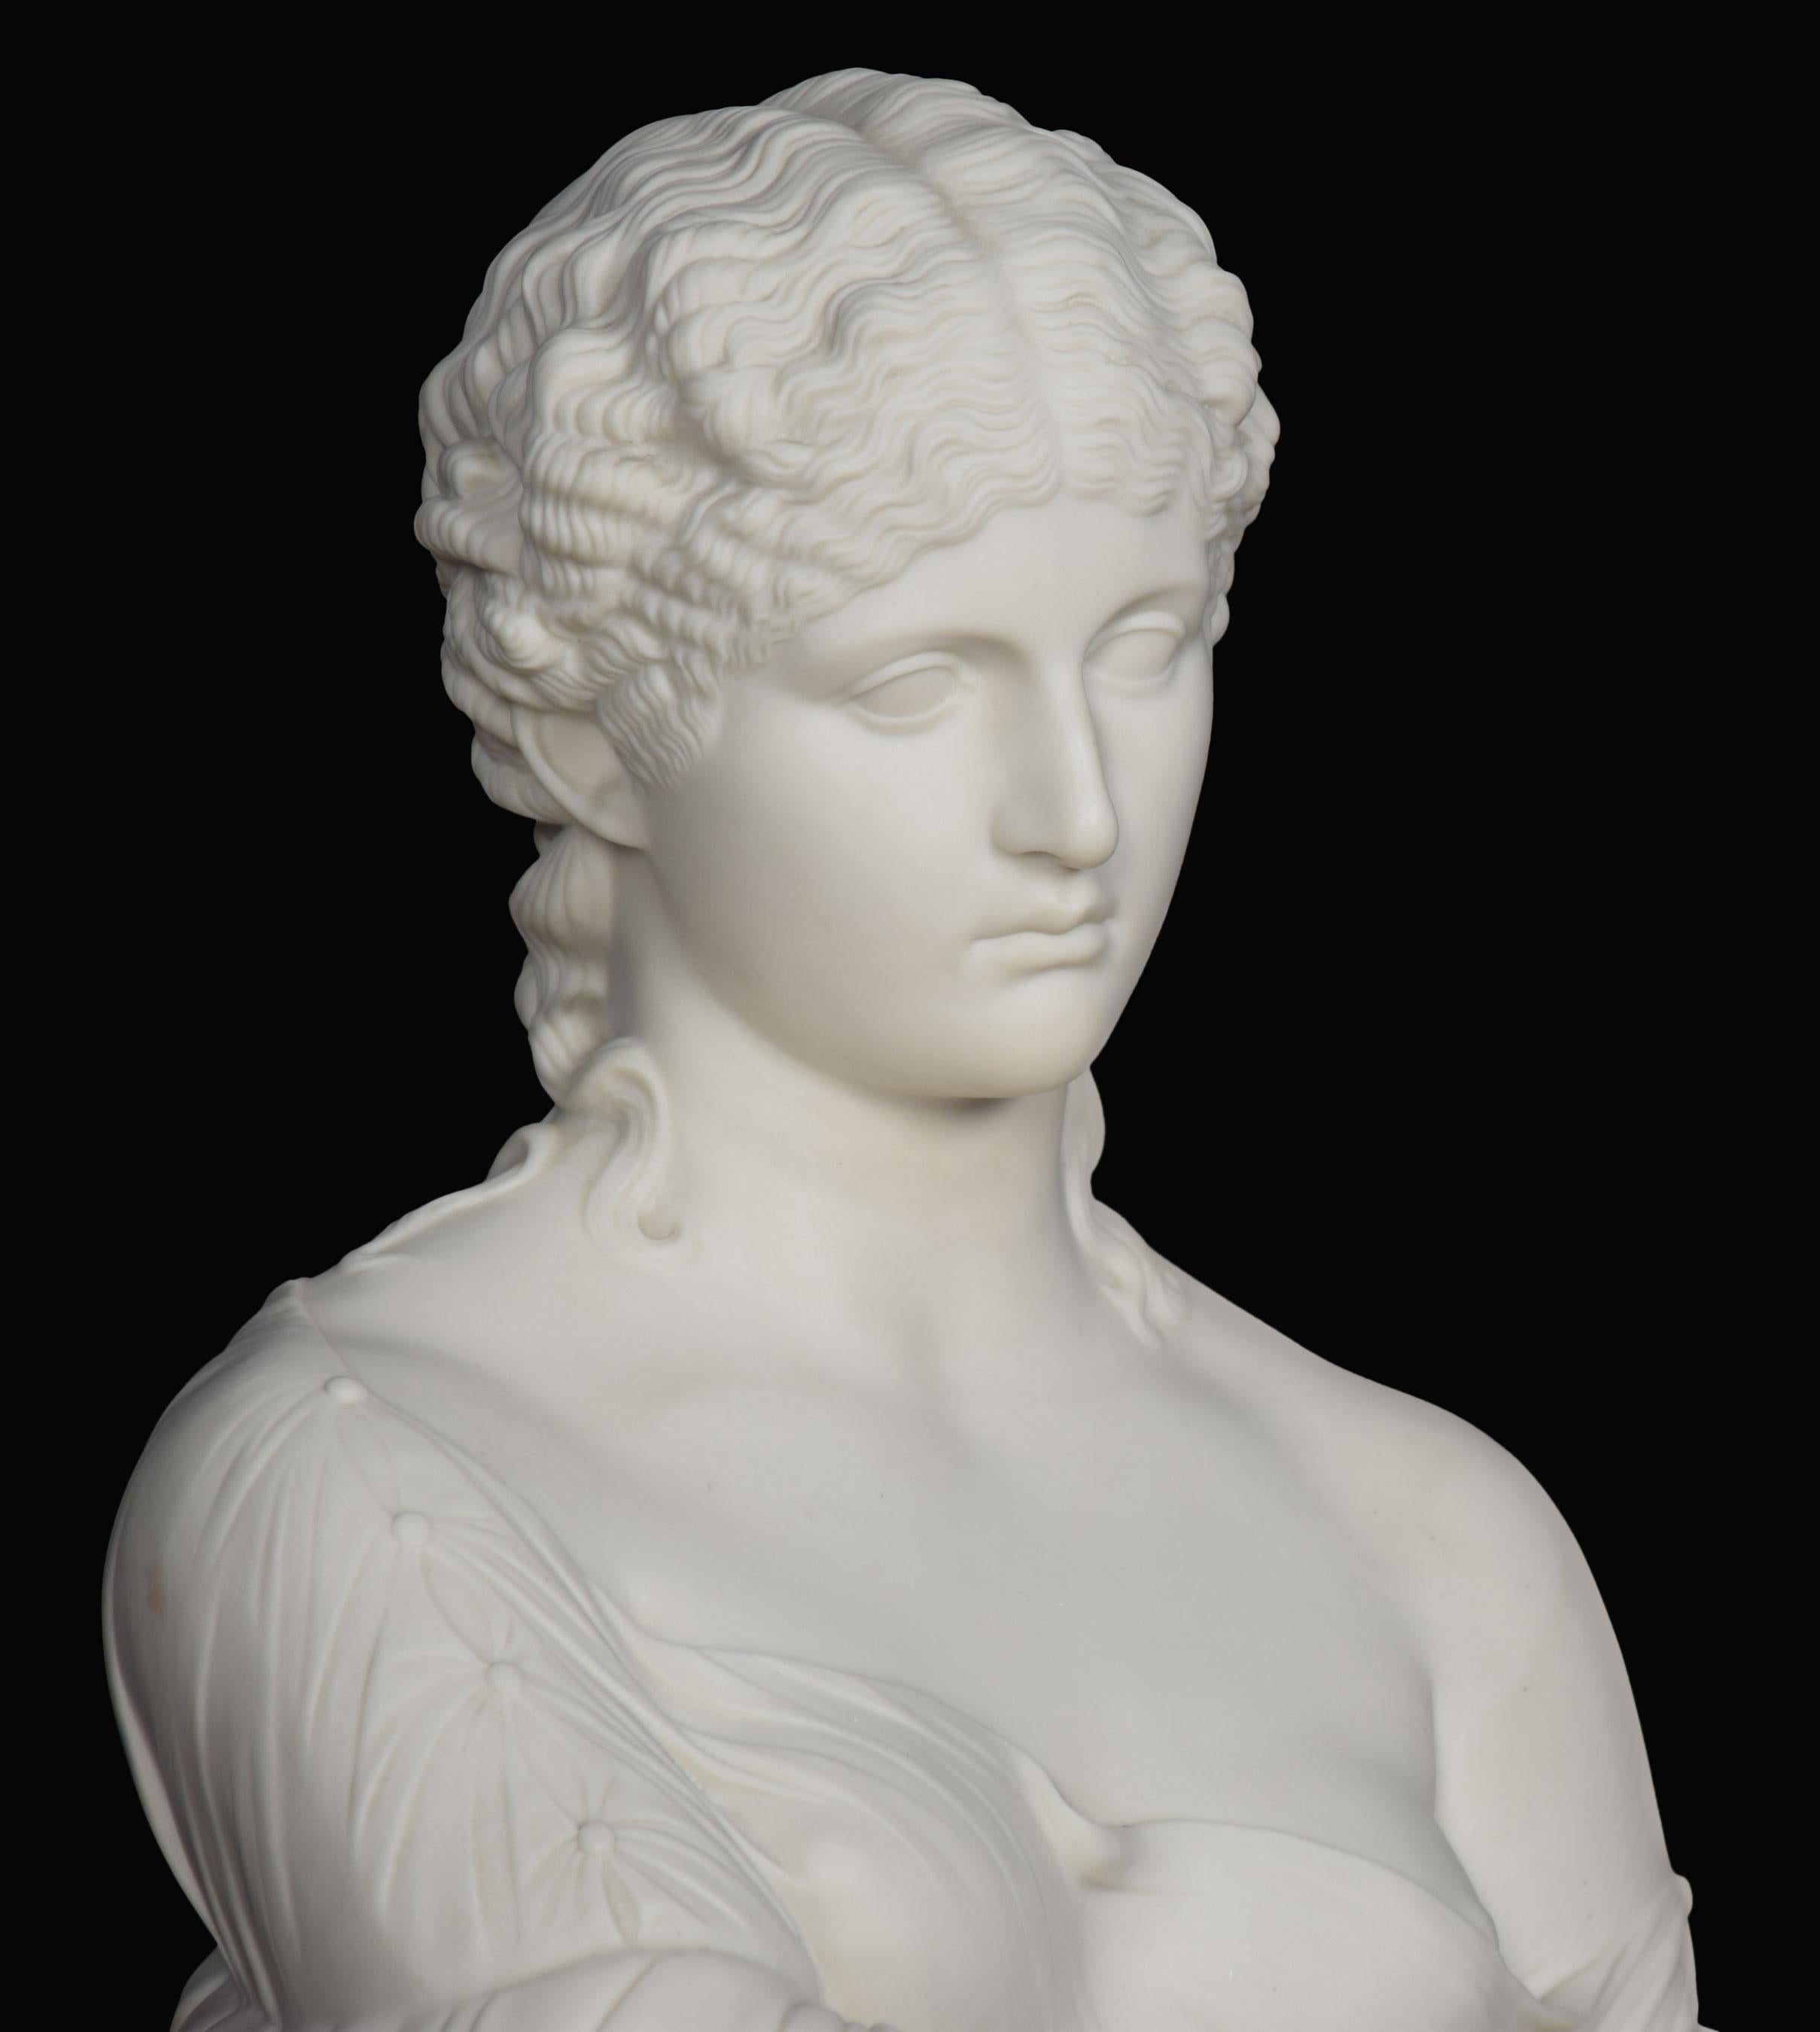 A late 19th century Copeland Parian bust of a female figure. Raised up on a circular pedestal.
Dimensions
Height 14 inches
Width 10 inches
Depth 6 inches.